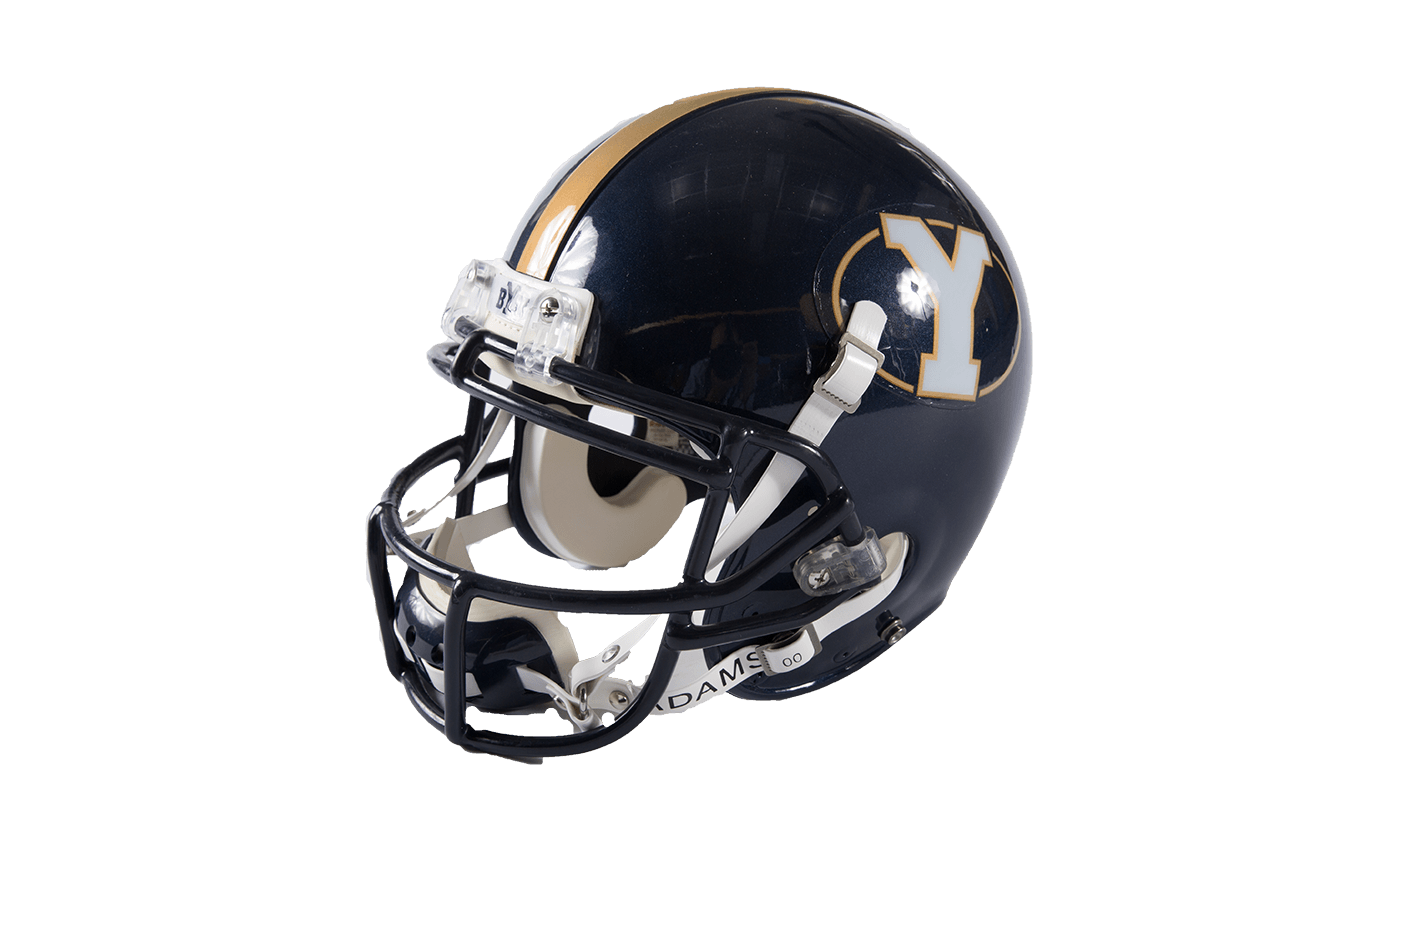 The helmet the Cougars wore in the early 2000s